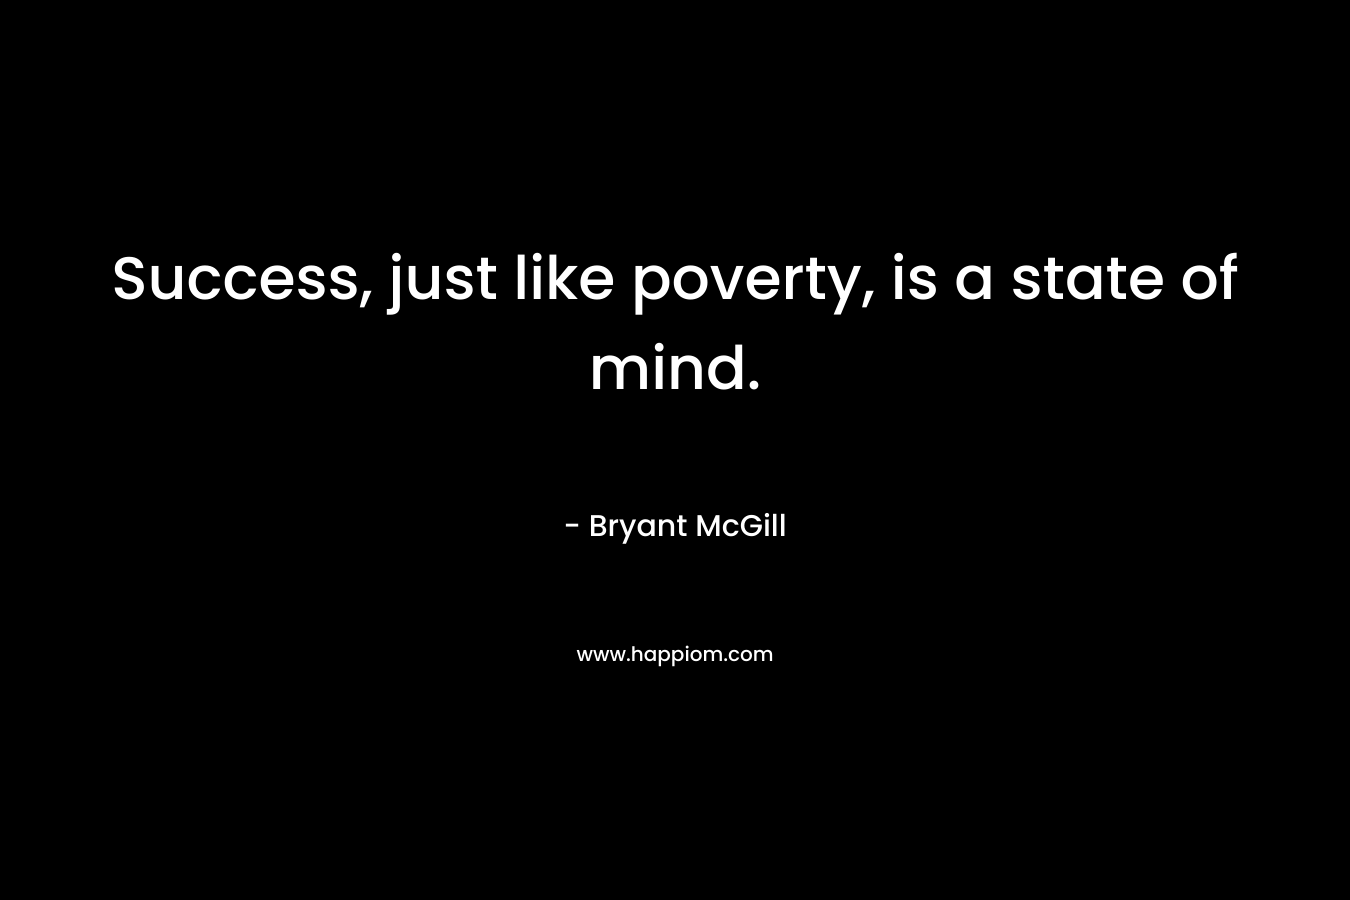 Success, just like poverty, is a state of mind.